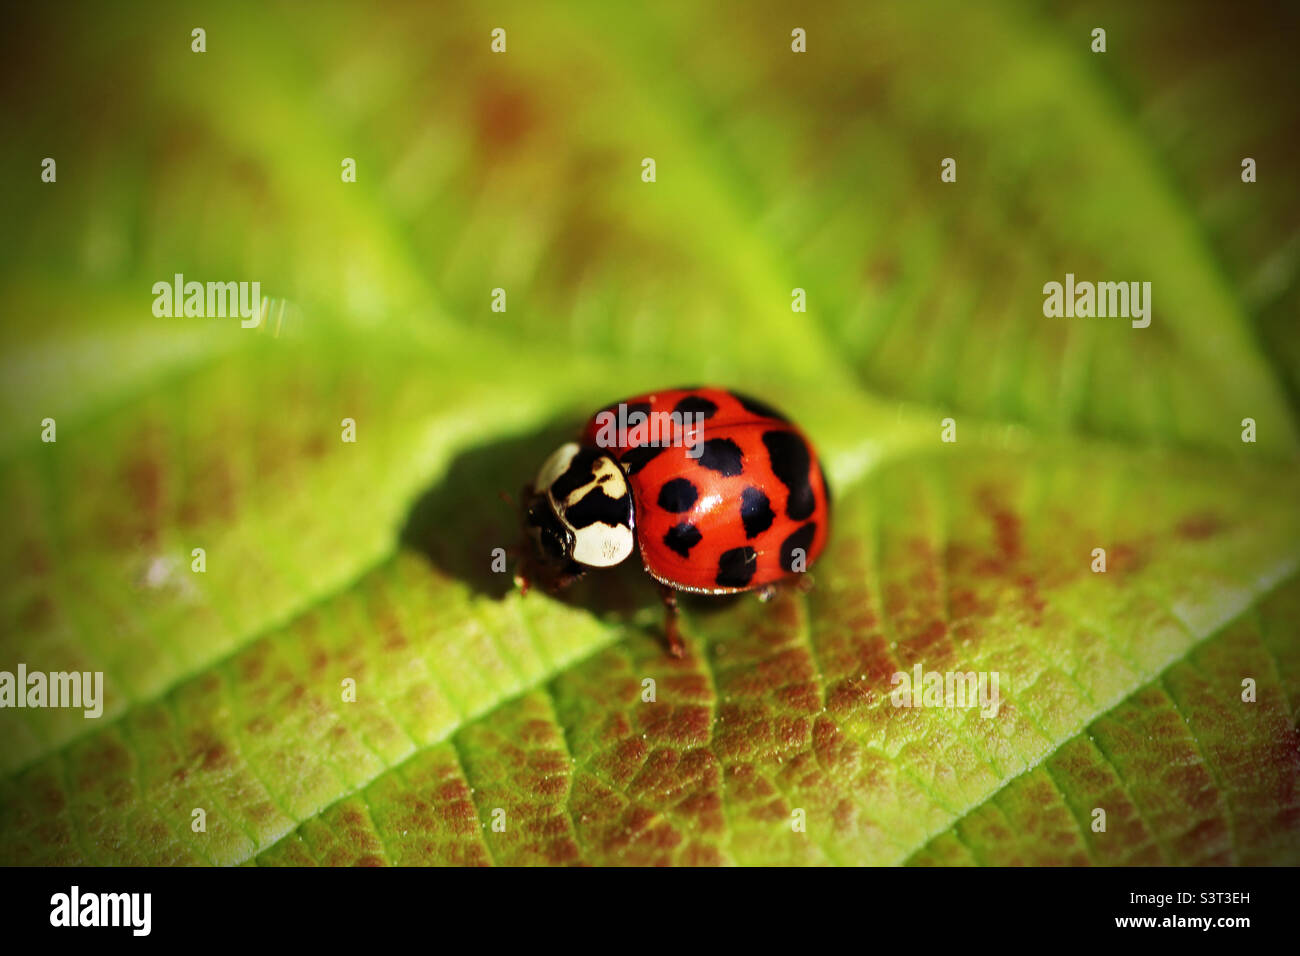 An extreme closeup of a ladybird on a leaf Stock Photo